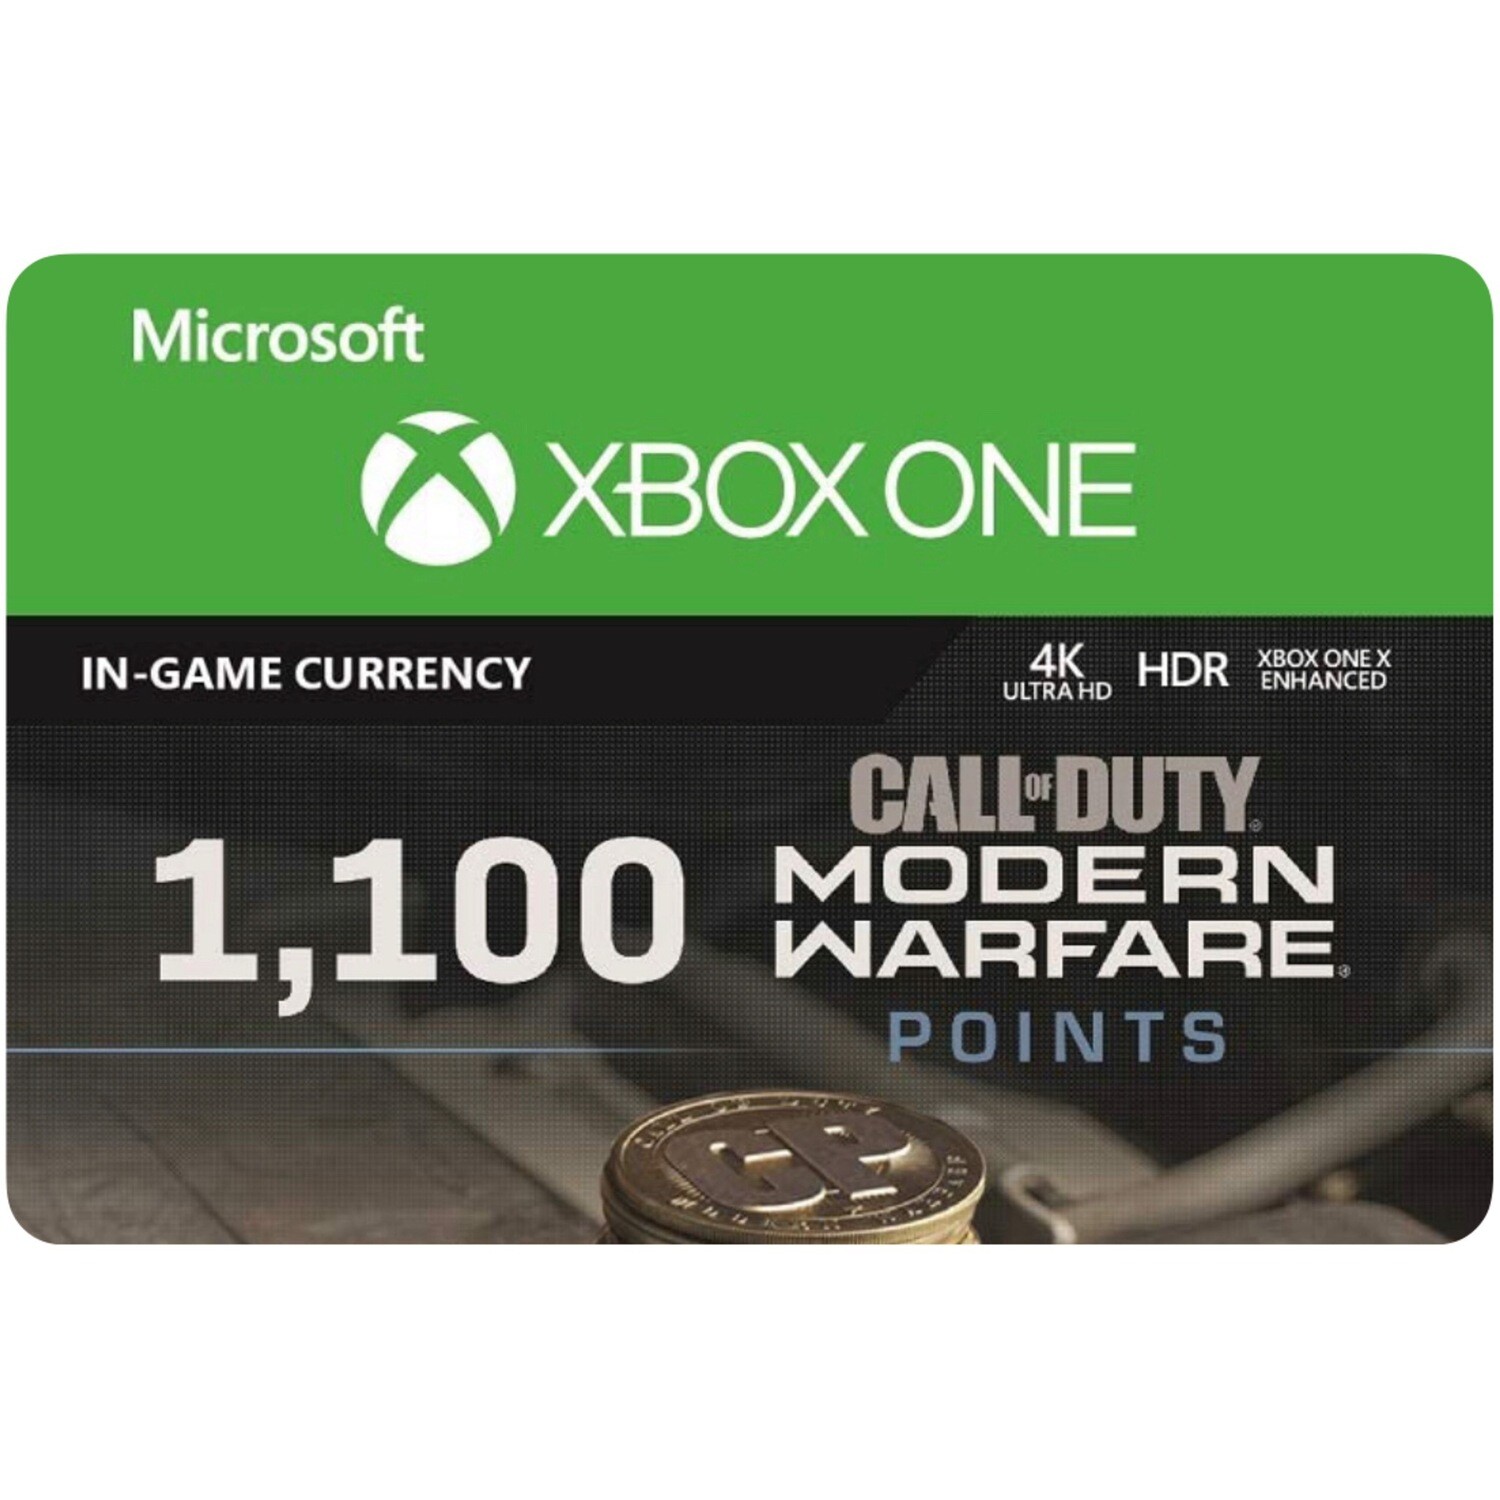 1100 Call of Duty Modern Warfare Points for Xbox US